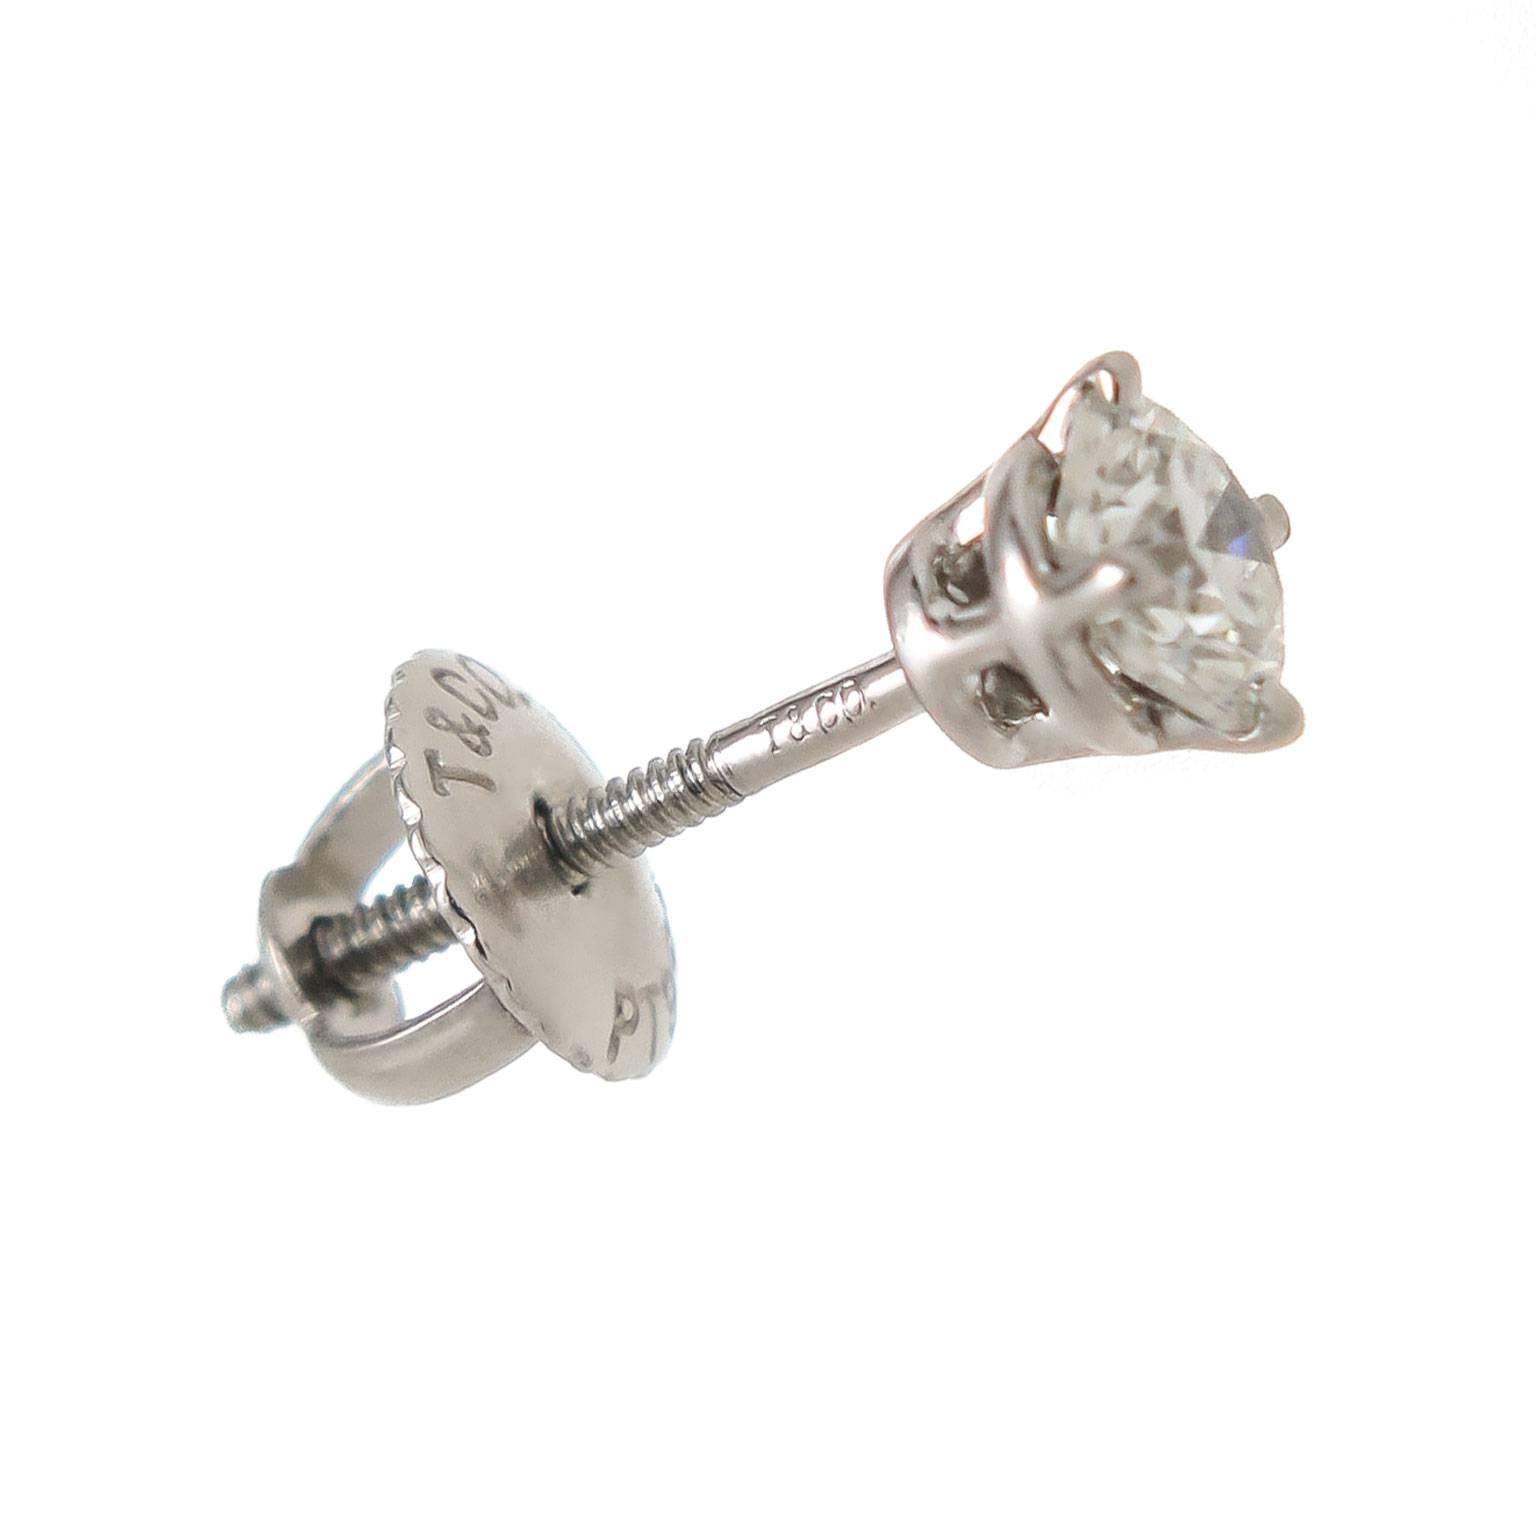 Circa 2010 Tiffany & Company Platinum Diamond stud Earrings, set with 1/4 carat Round brilliant cut Diamonds for a total of 1/2 carat for the earring pair. Each stone grades as G in Color and VS in Clarity. Having screw backs and come in the